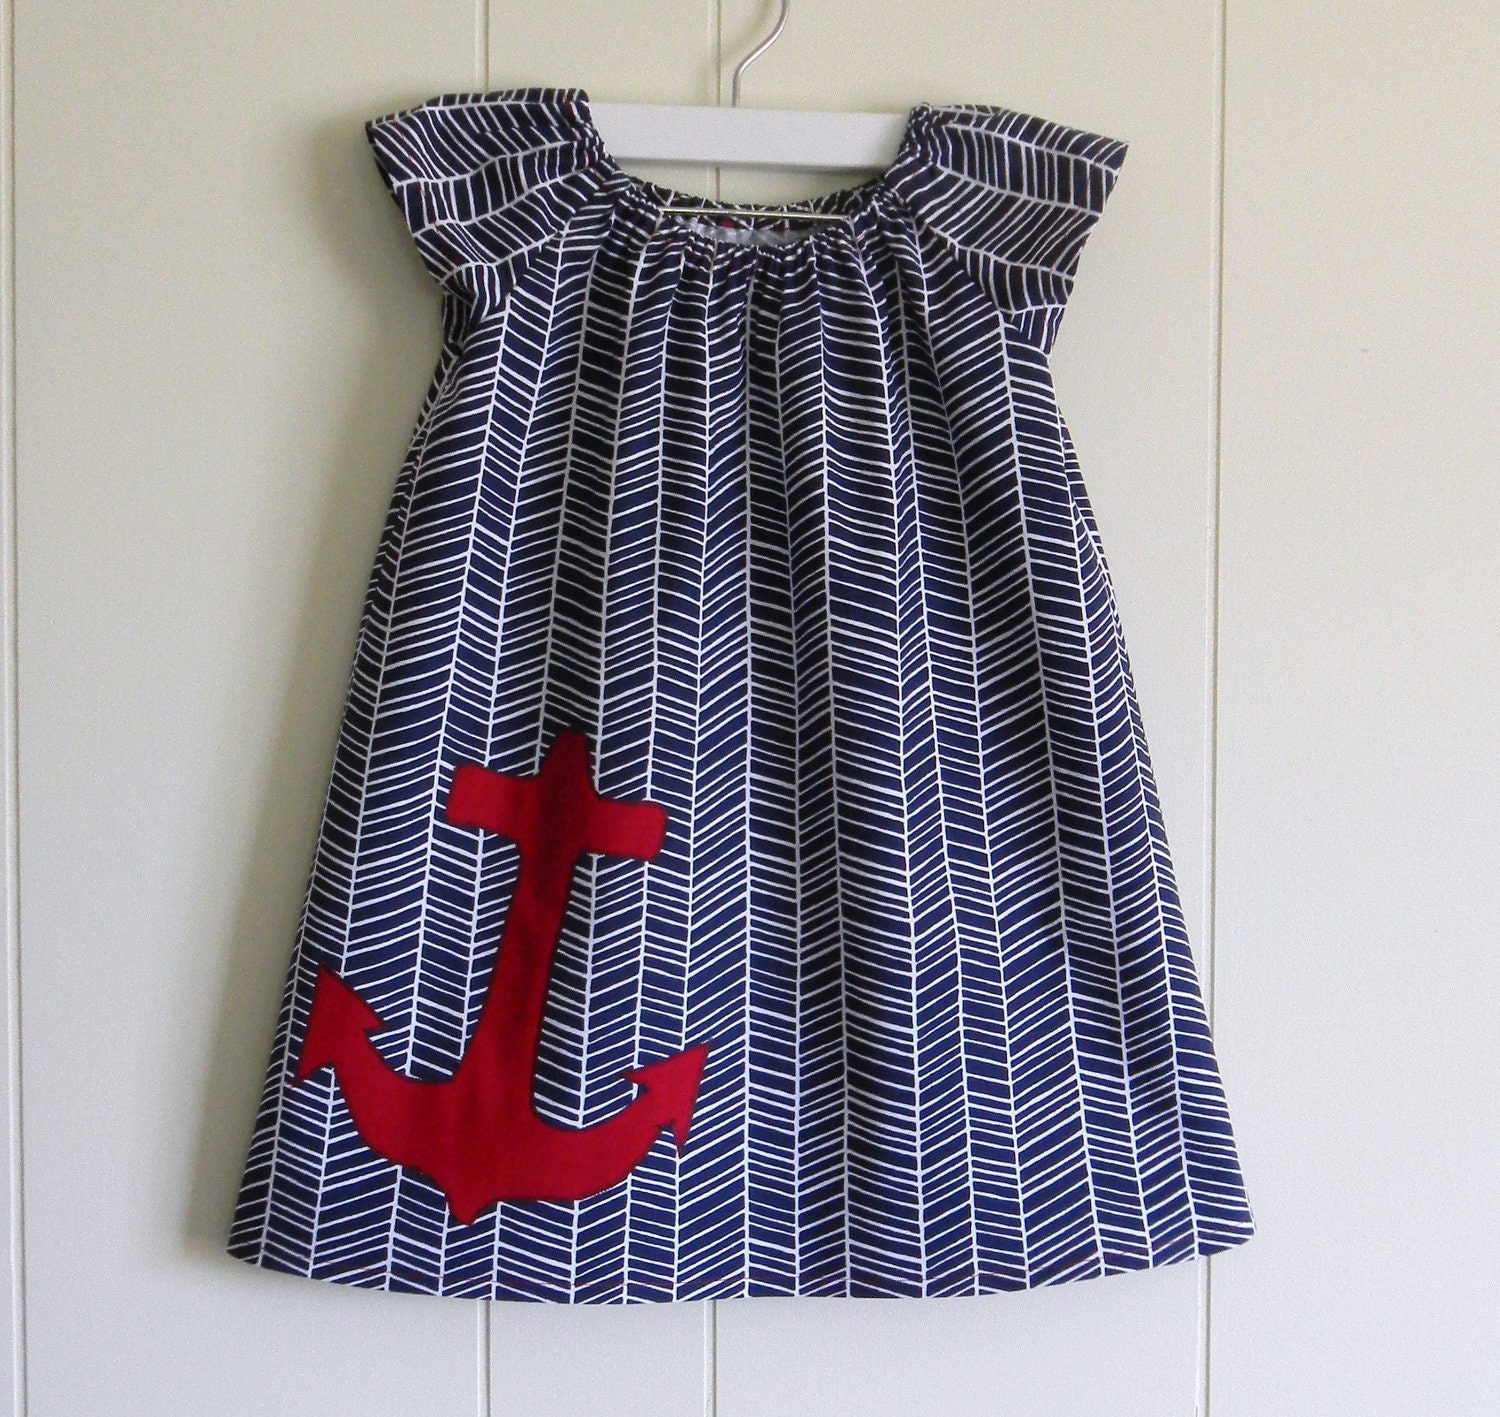 ShiftMod Tunic / Nautical Navy / Red Anchor  / 6 Months, 12 Months, 2t, 3t, 4t, 5t, 6y by PerryFinalia